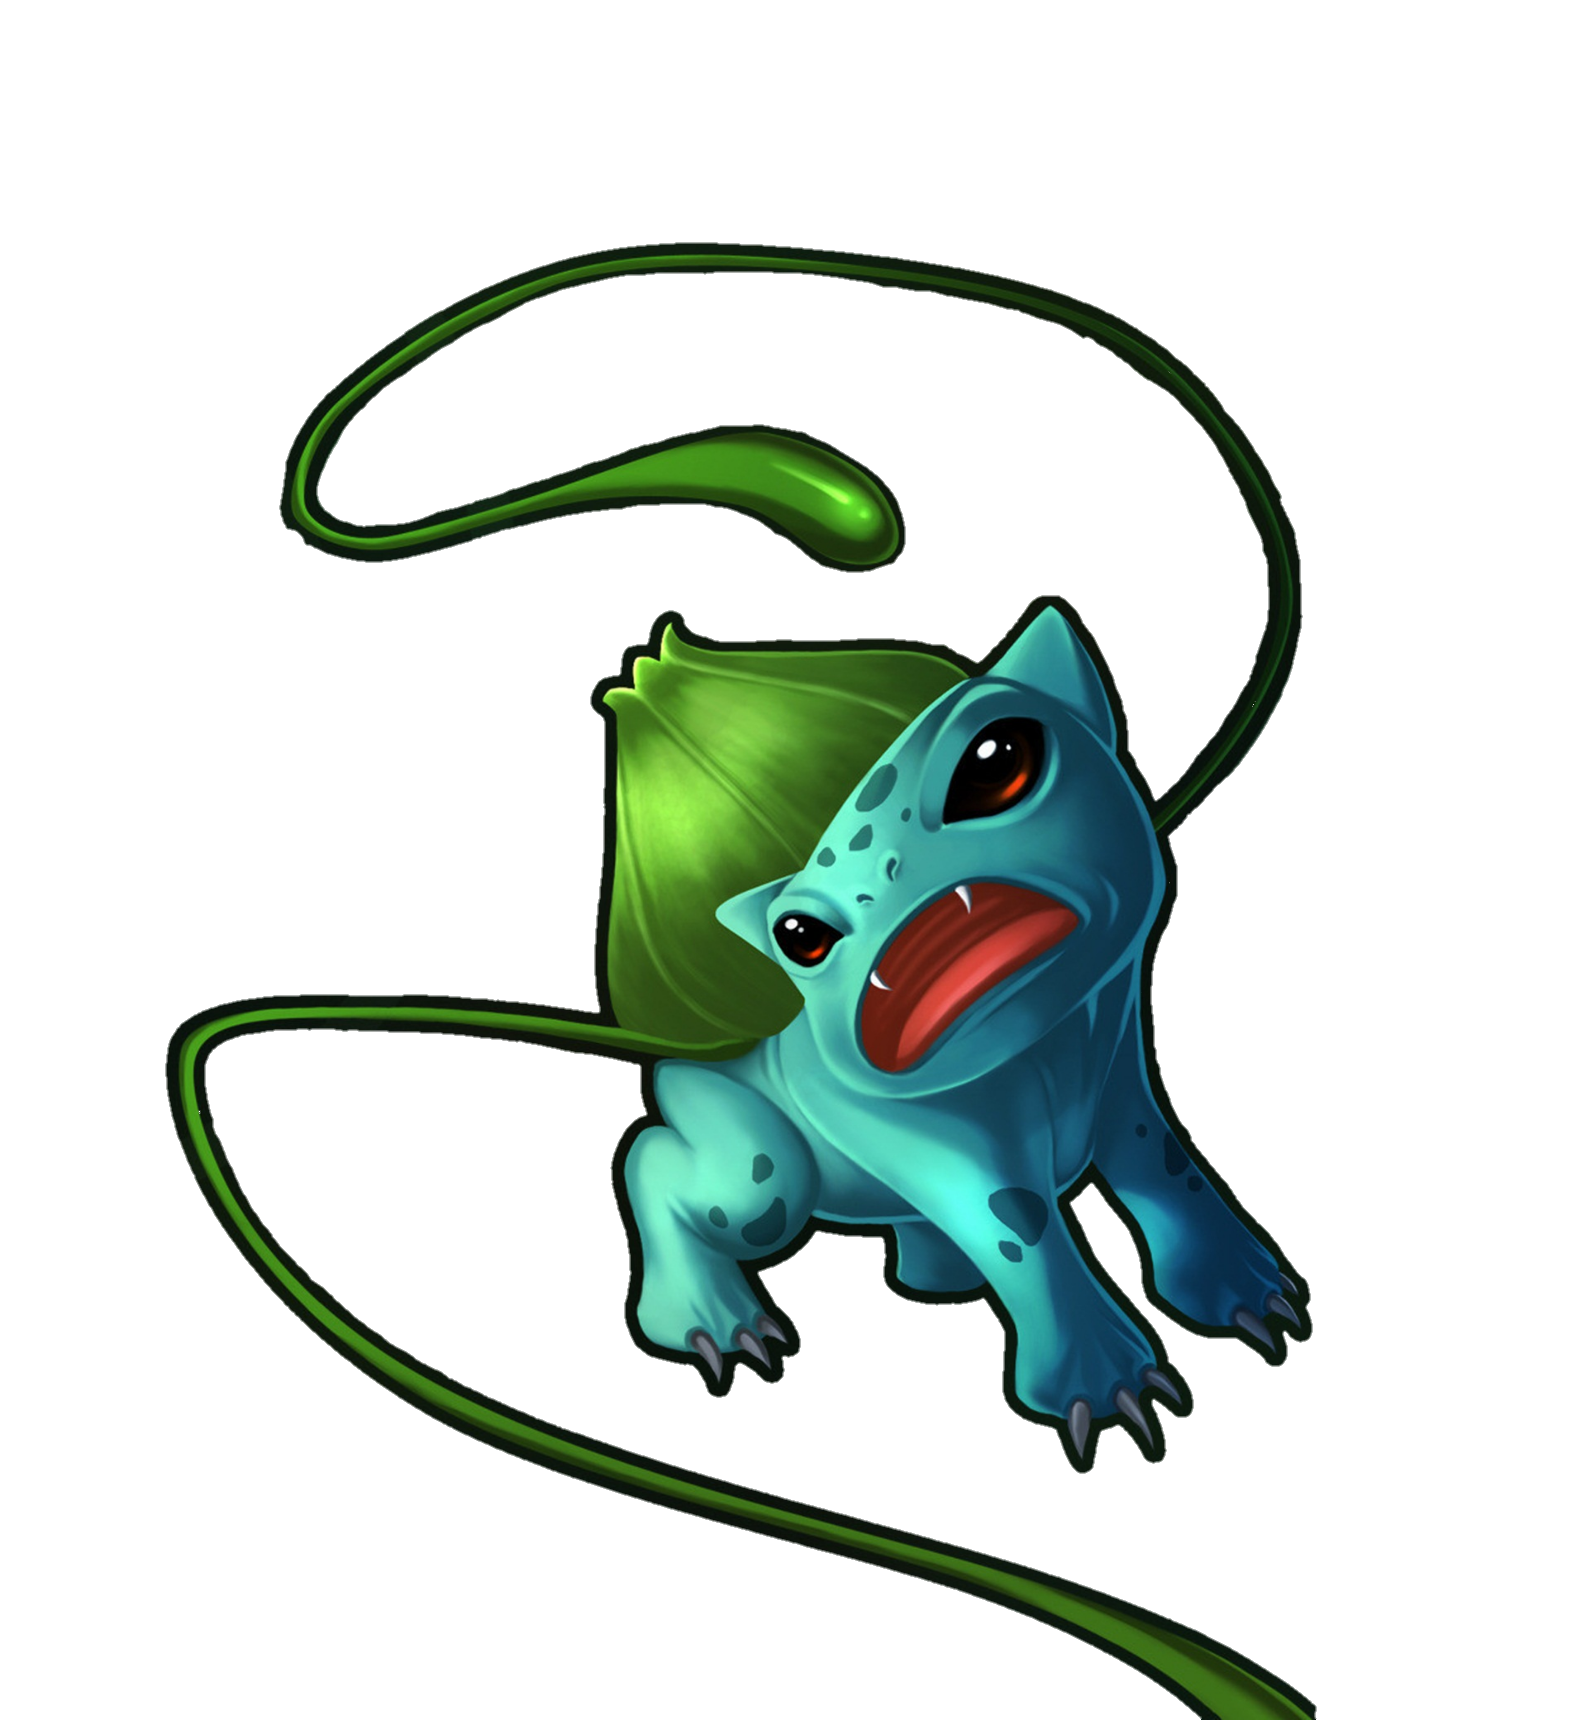 pokemon-png-from-pngfre-5